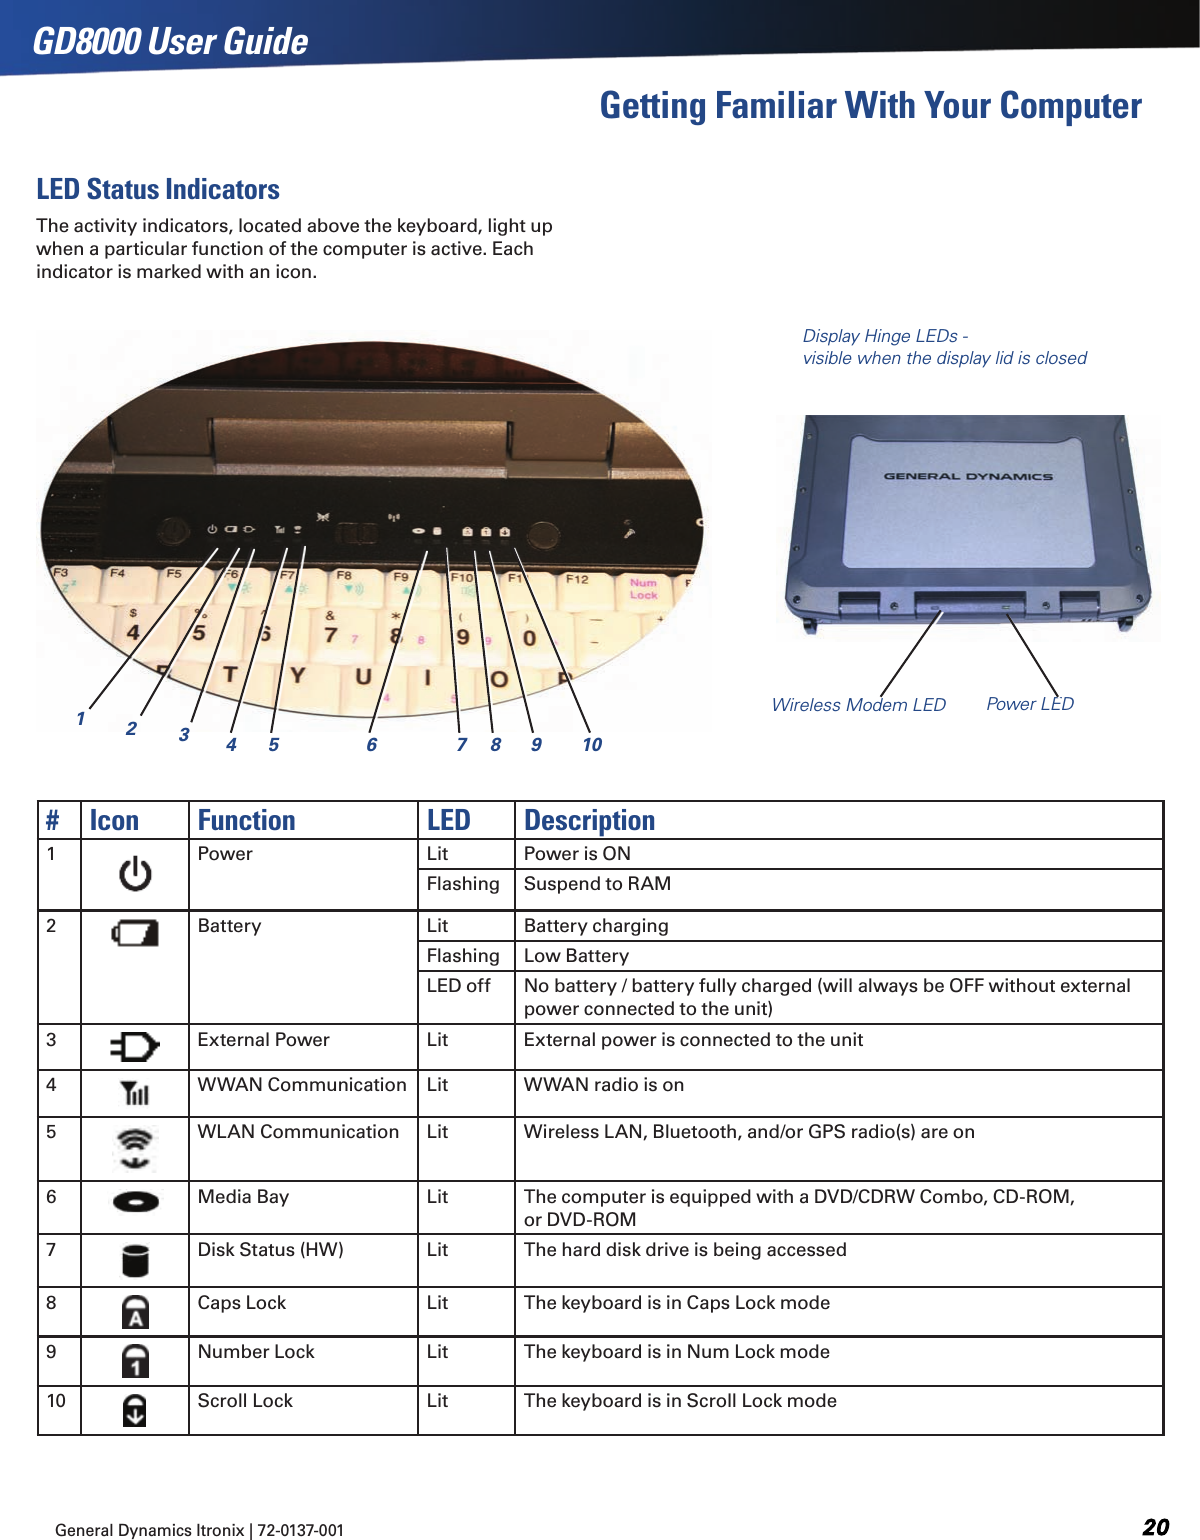 General Dynamics Itronix | 72-0137-001  GD8000 User GuideLED Status IndicatorsThe activity indicators, located above the keyboard, light up when a particular function of the computer is active. Each indicator is marked with an icon.# Icon Function LED Description1 Power Lit Power is ONFlashing Suspend to RAM2Battery Lit Battery chargingFlashing Low BatteryLED off No battery / battery fully charged (will always be OFF without external power connected to the unit)3External Power Lit External power is connected to the unit4WWAN Communication Lit WWAN radio is on5WLAN Communication Lit Wireless LAN, Bluetooth, and/or GPS radio(s) are on6Media Bay Lit The computer is equipped with a DVD/CDRW Combo, CD-ROM,             or DVD-ROM7Disk Status (HW) Lit The hard disk drive is being accessed8Caps Lock  Lit The keyboard is in Caps Lock mode9Number Lock Lit The keyboard is in Num Lock mode10 Scroll Lock Lit The keyboard is in Scroll Lock mode1234 5 6 7 8 9 10Power LEDWireless Modem LEDDisplay Hinge LEDs - visible when the display lid is closedGetting Familiar With Your Computer